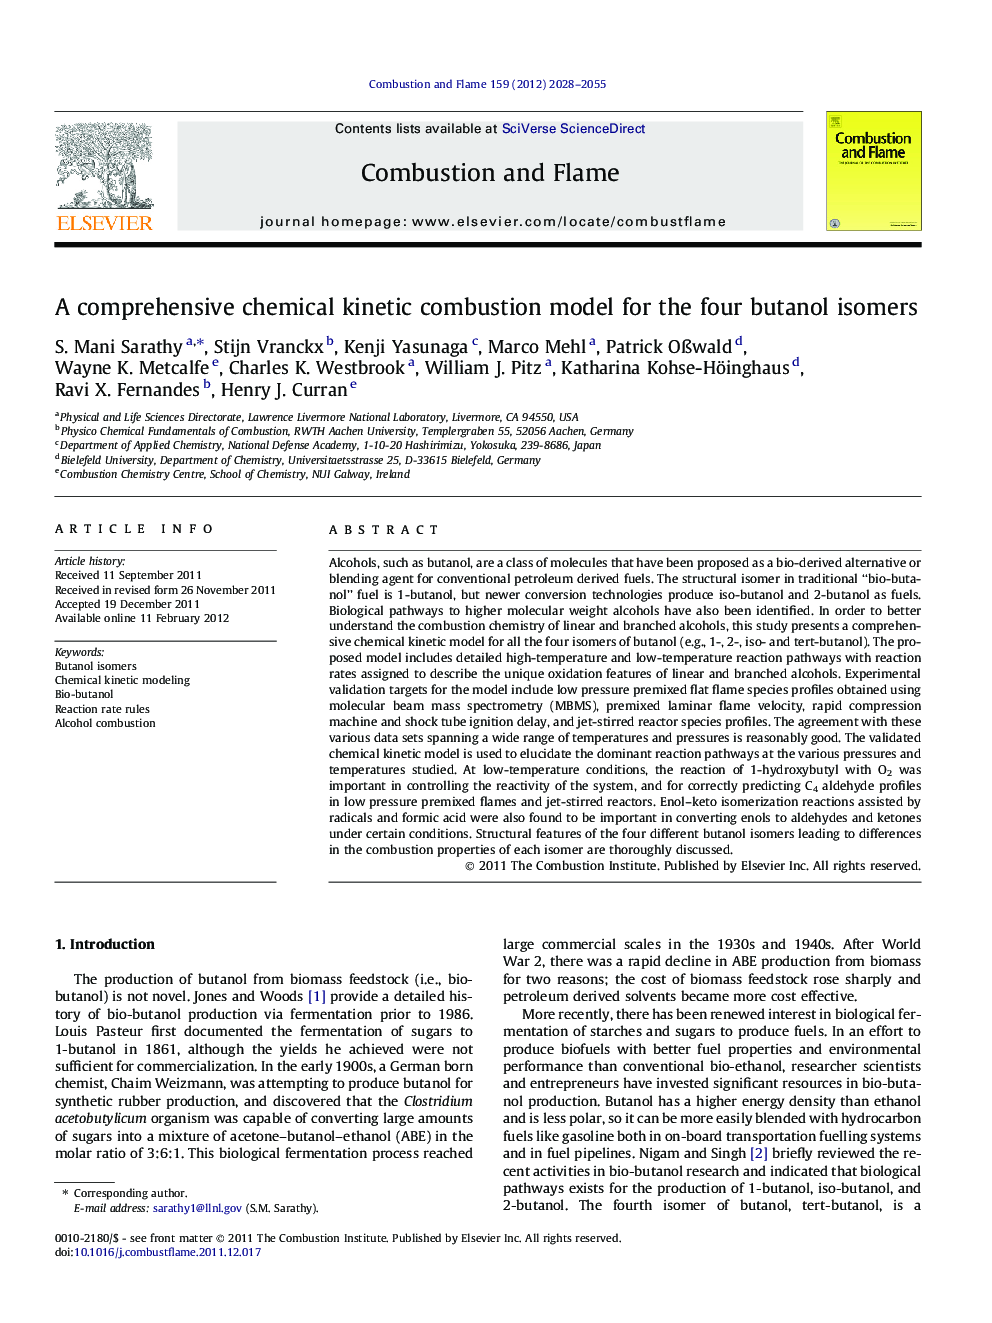 A comprehensive chemical kinetic combustion model for the four butanol isomers